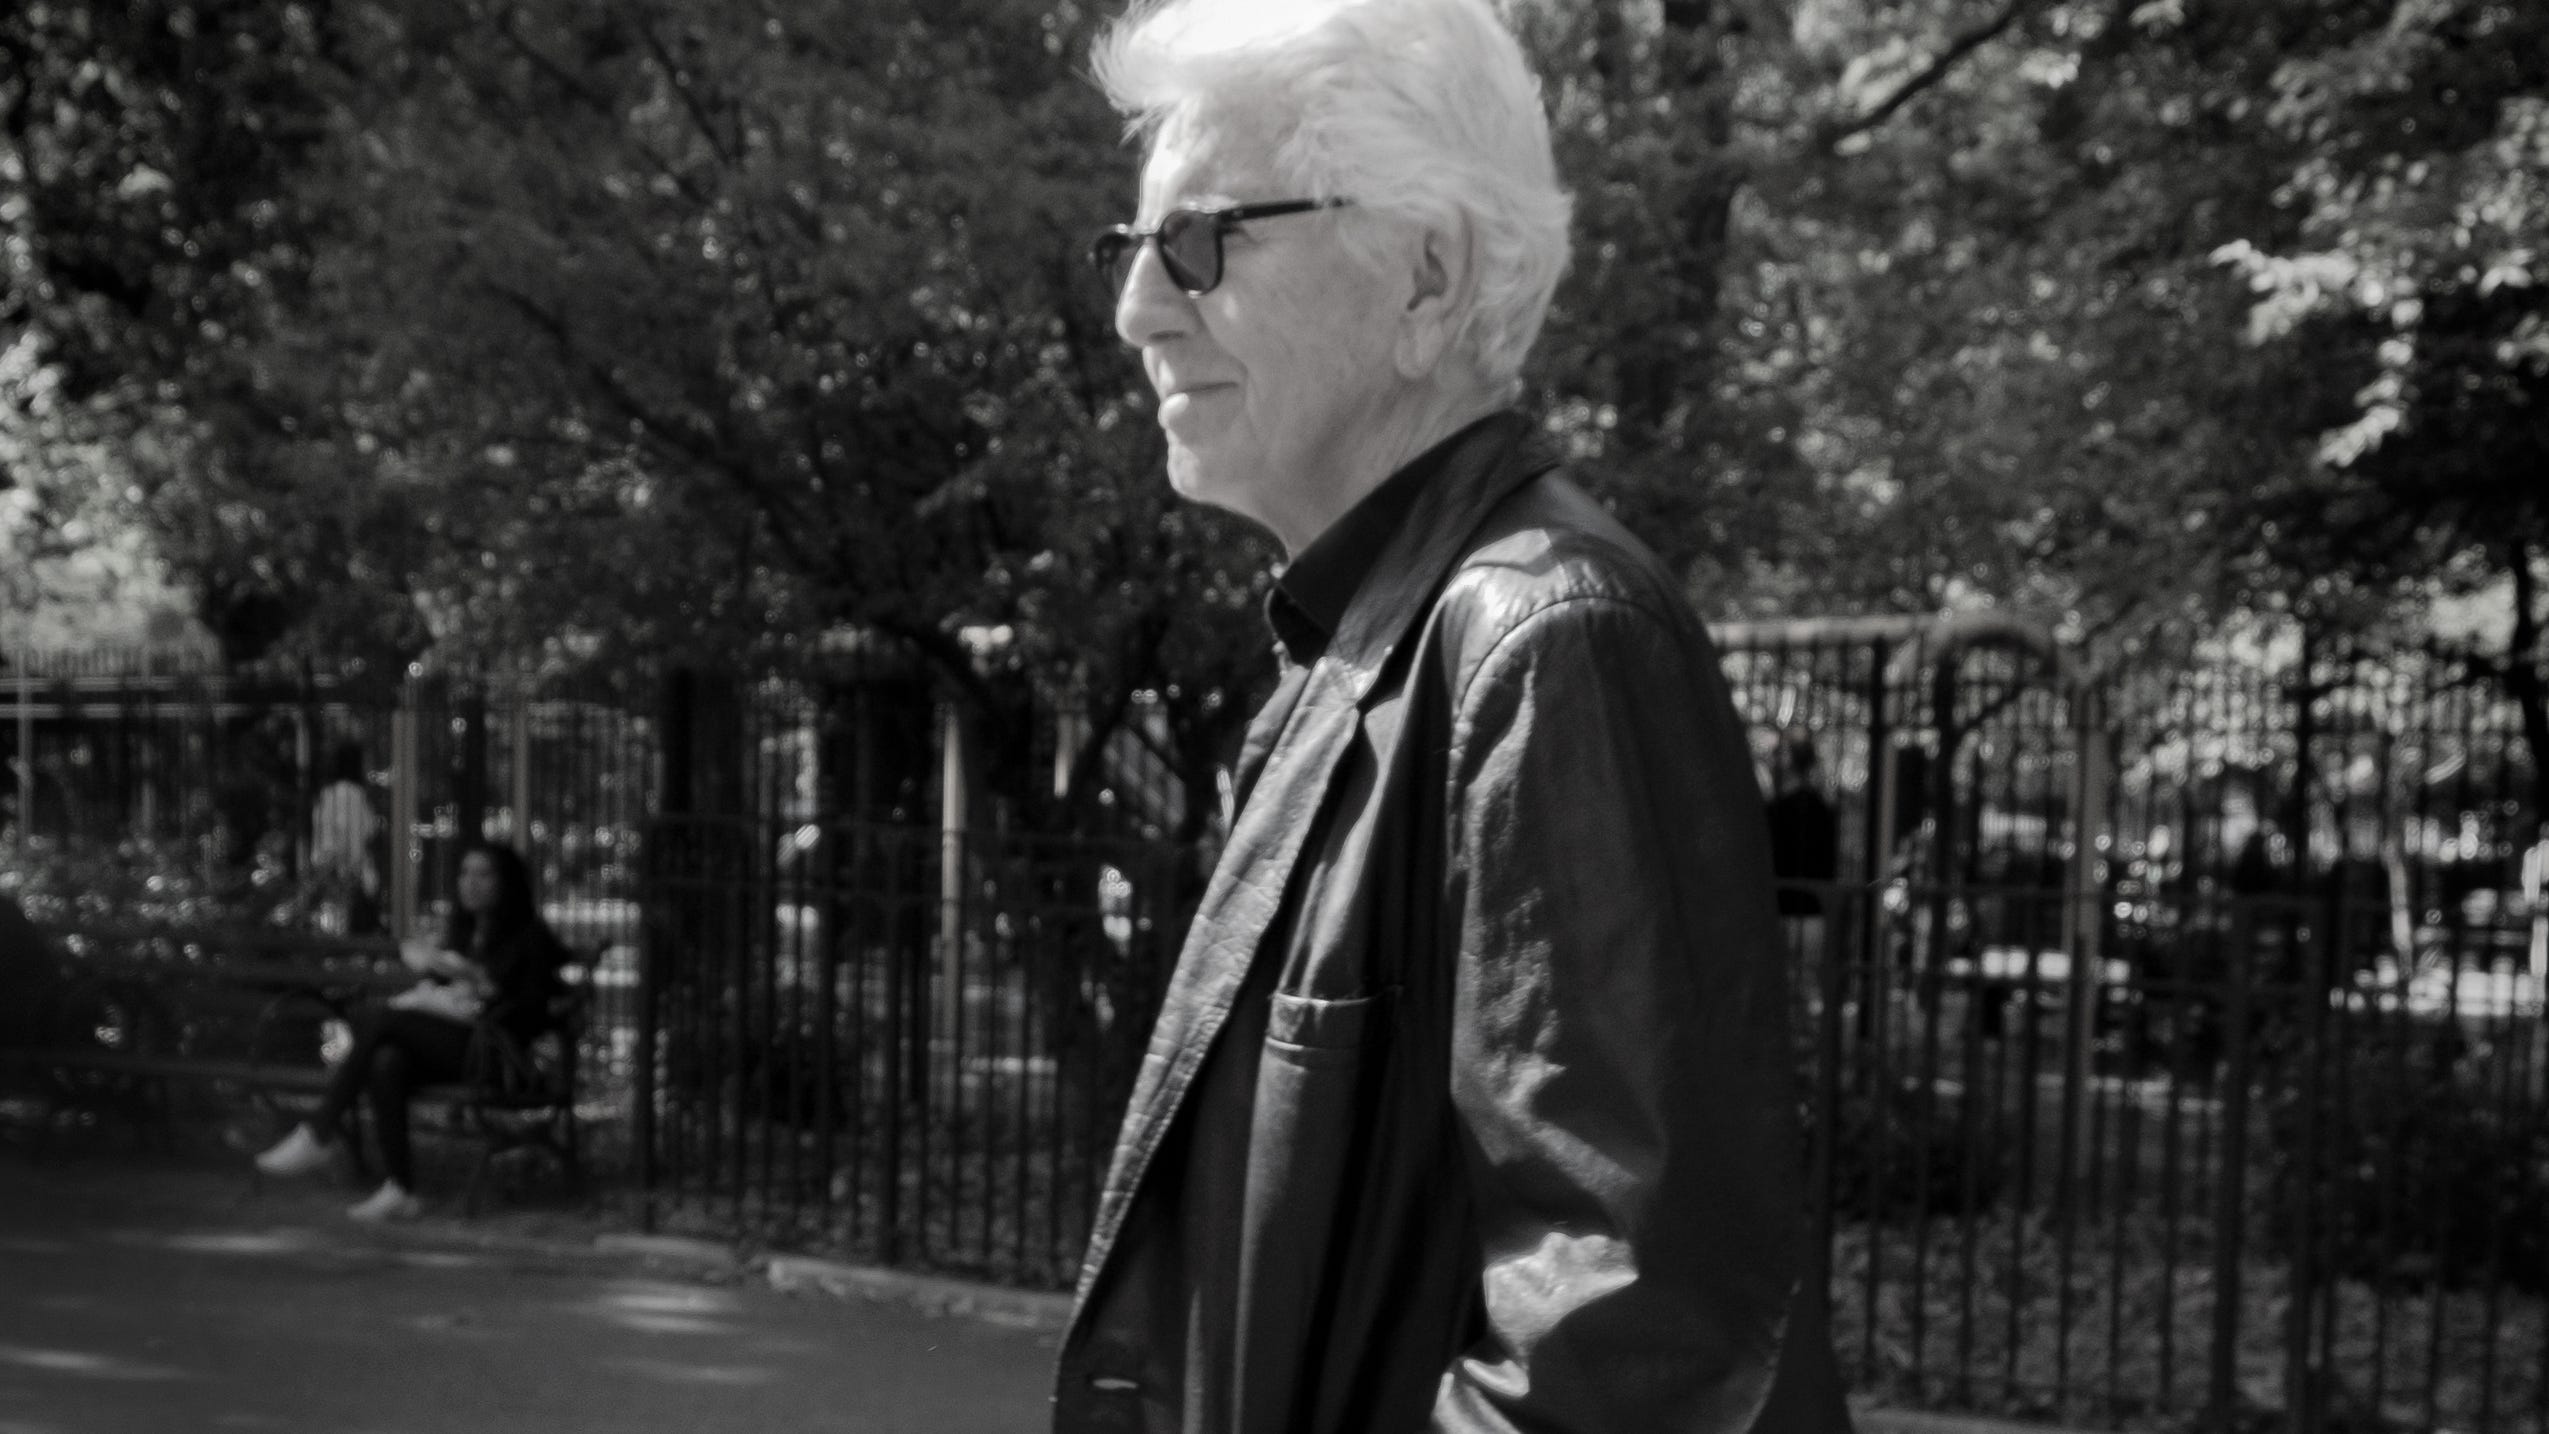 Graham Nash on missing David Crosby, dismay with America: 'I have a right to speak my mind'